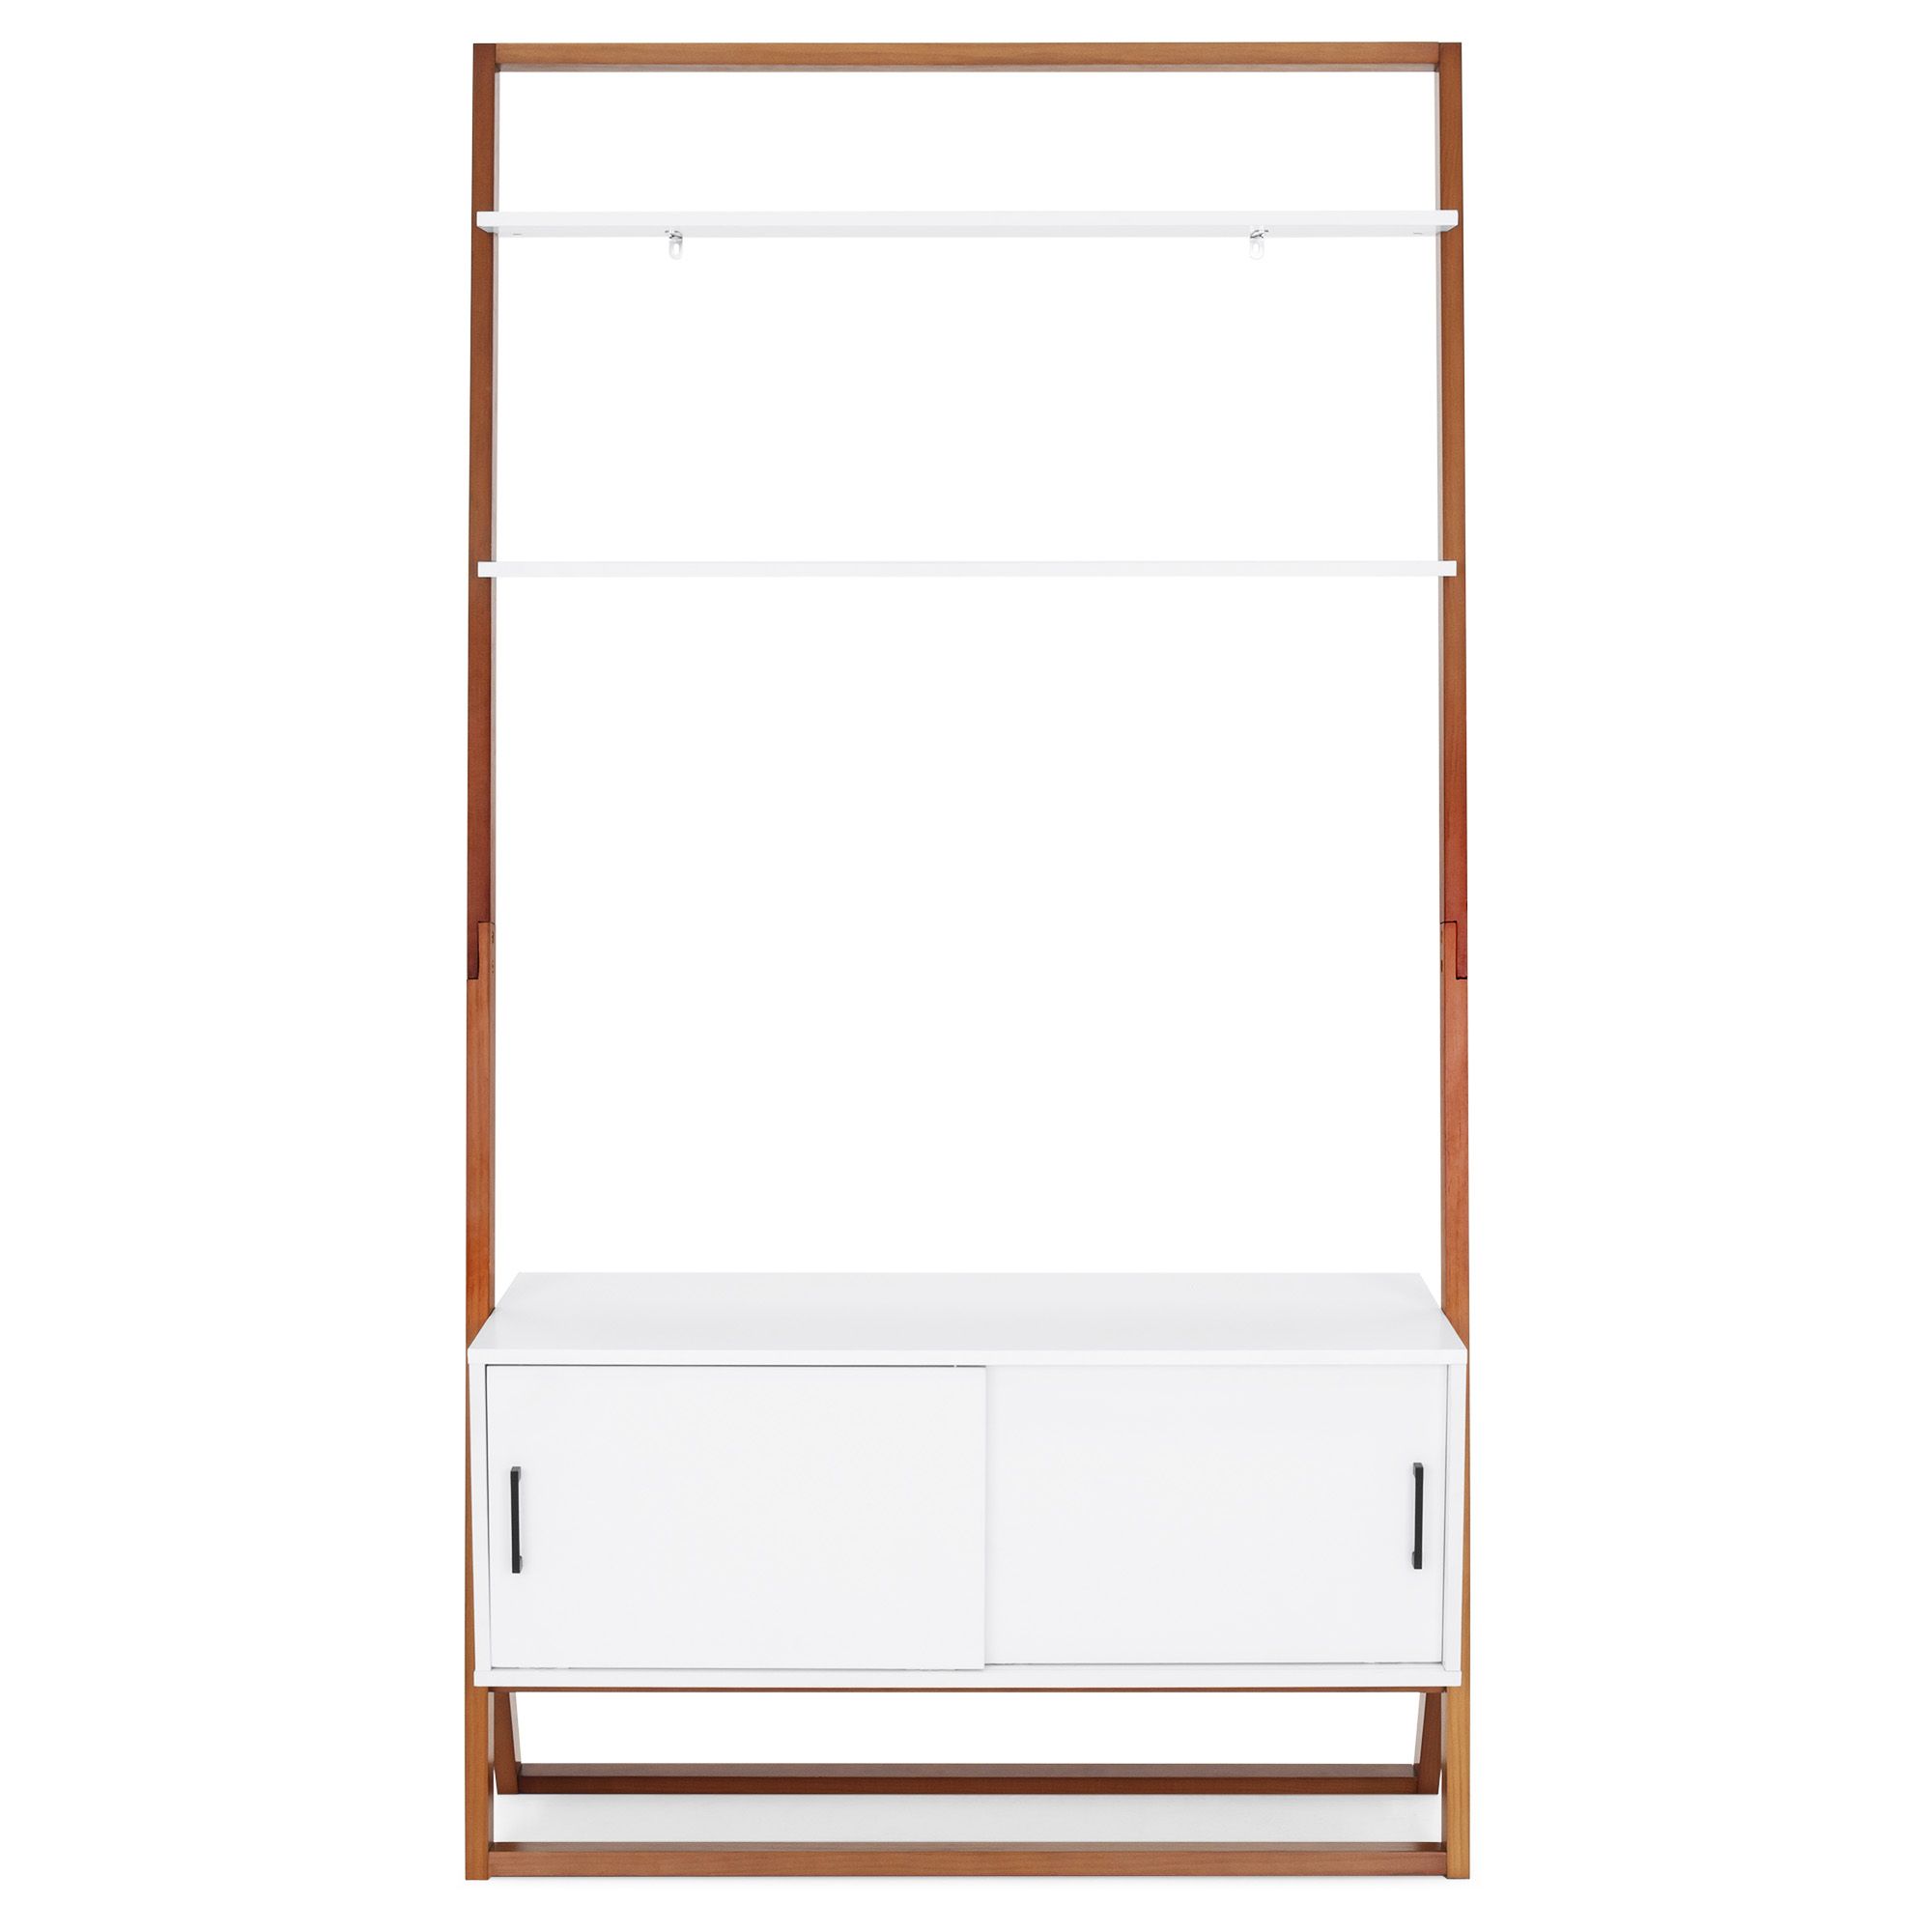 Bcp 42in Ladder Shelf Tv Stand W/ Cabinet – White Inside Tiva White Ladder Tv Stands (View 13 of 15)